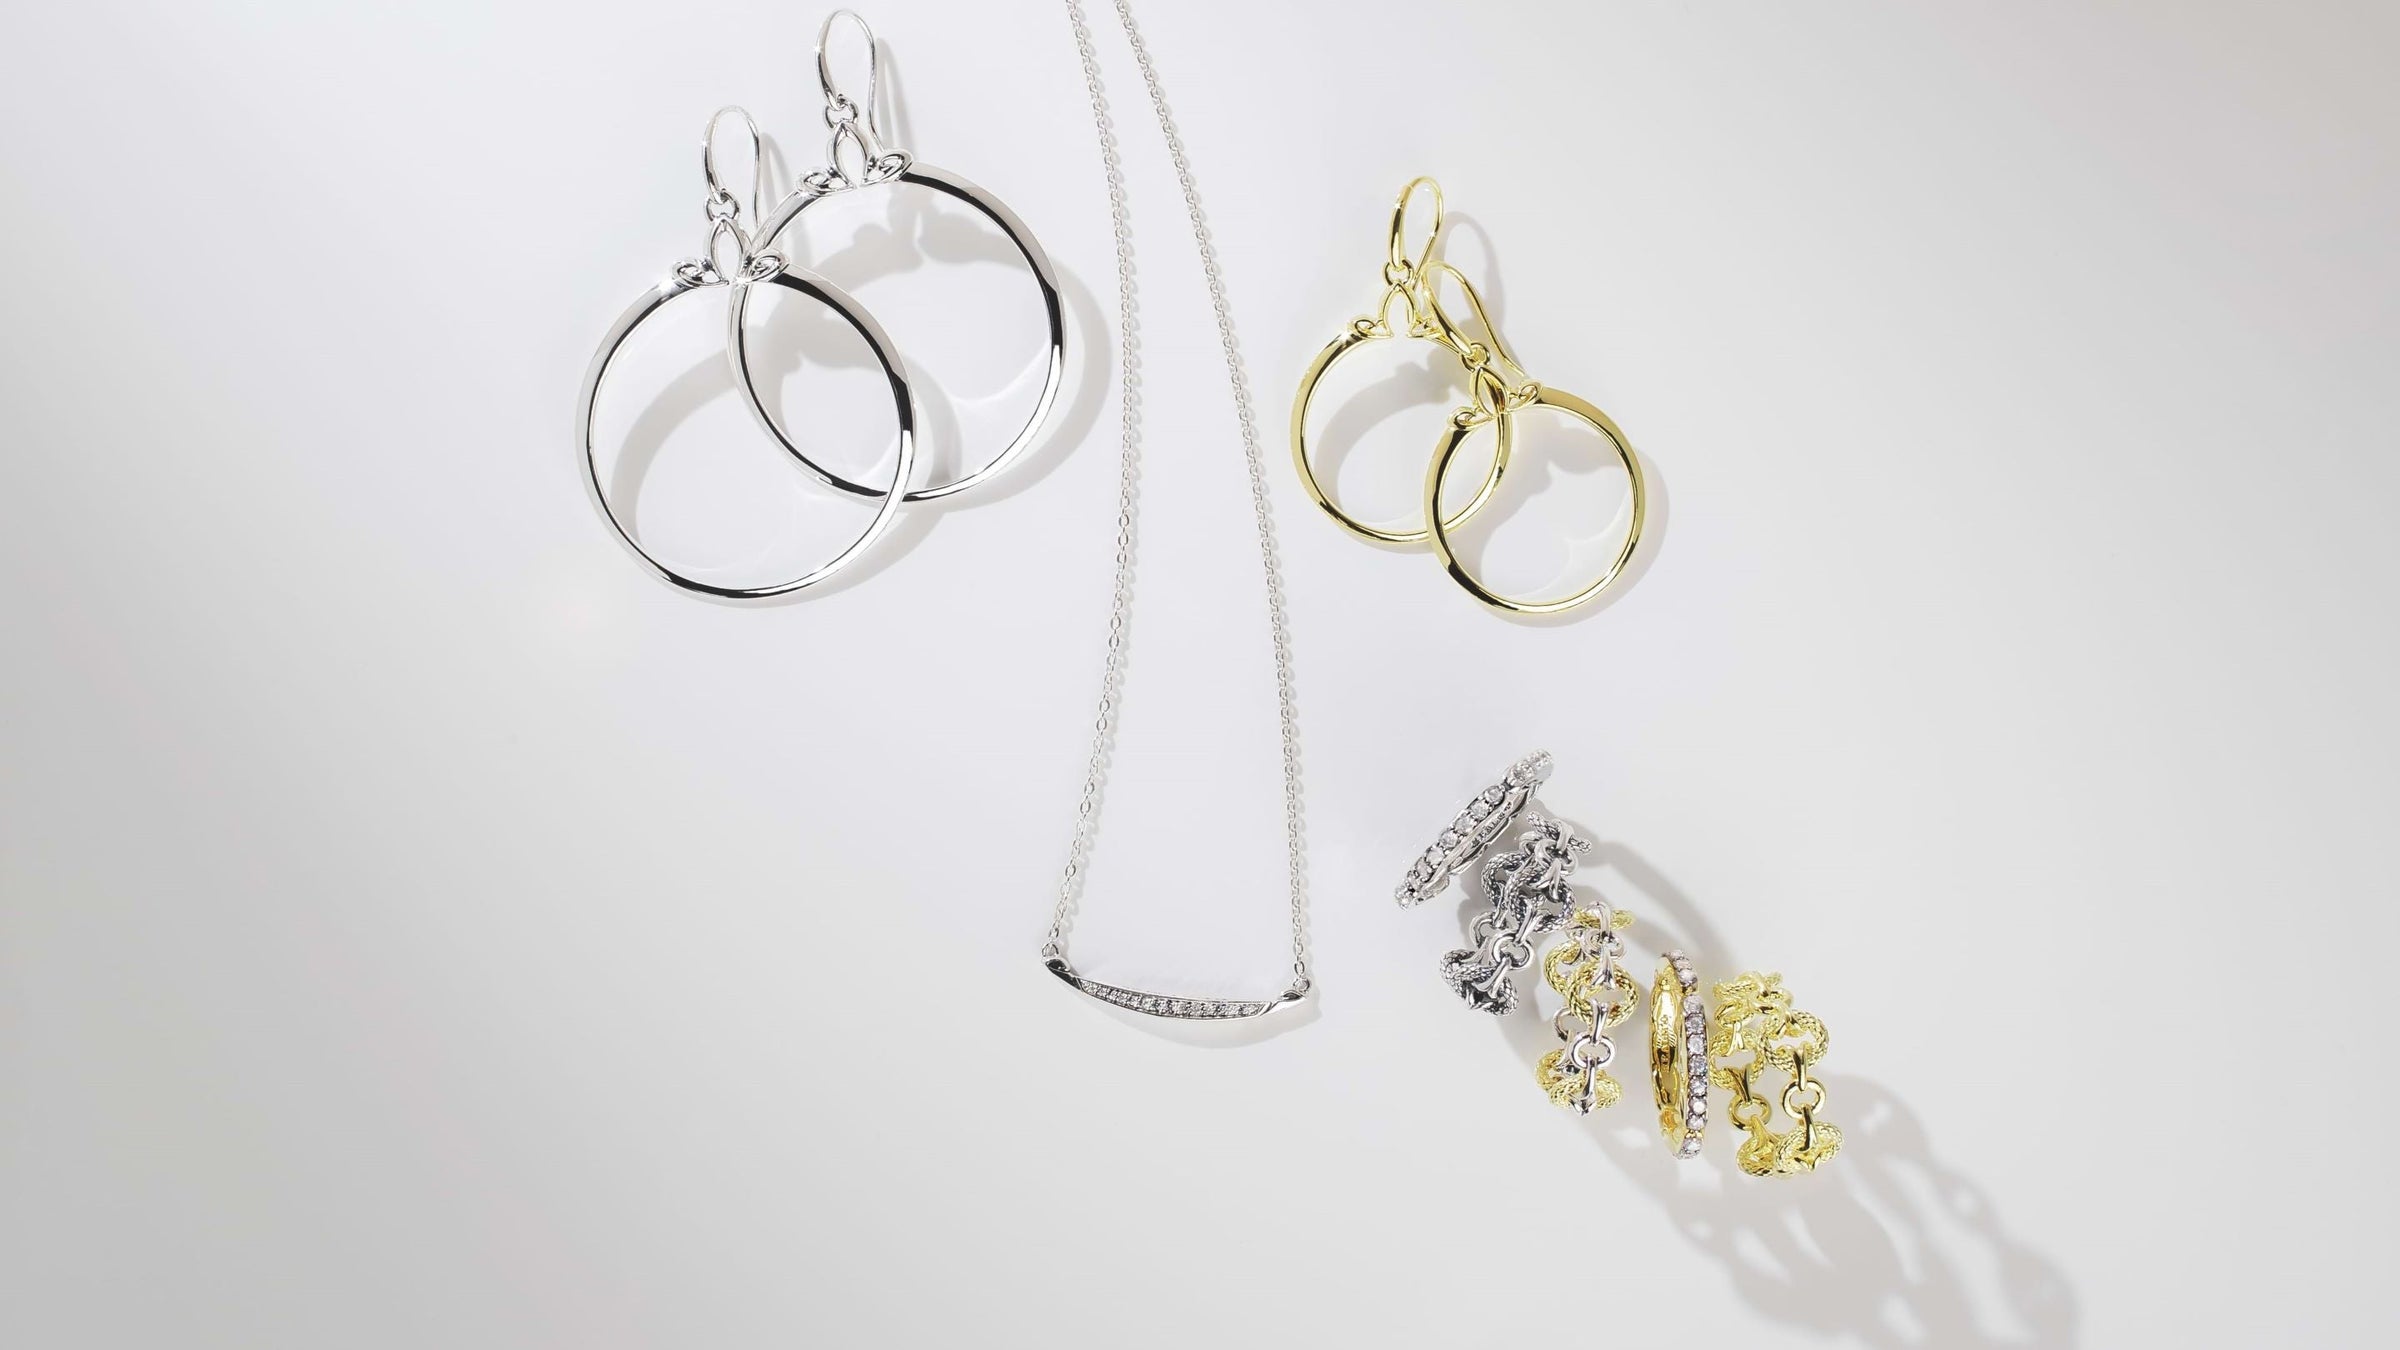 Array of silver and gold jewelry from REALM under $250